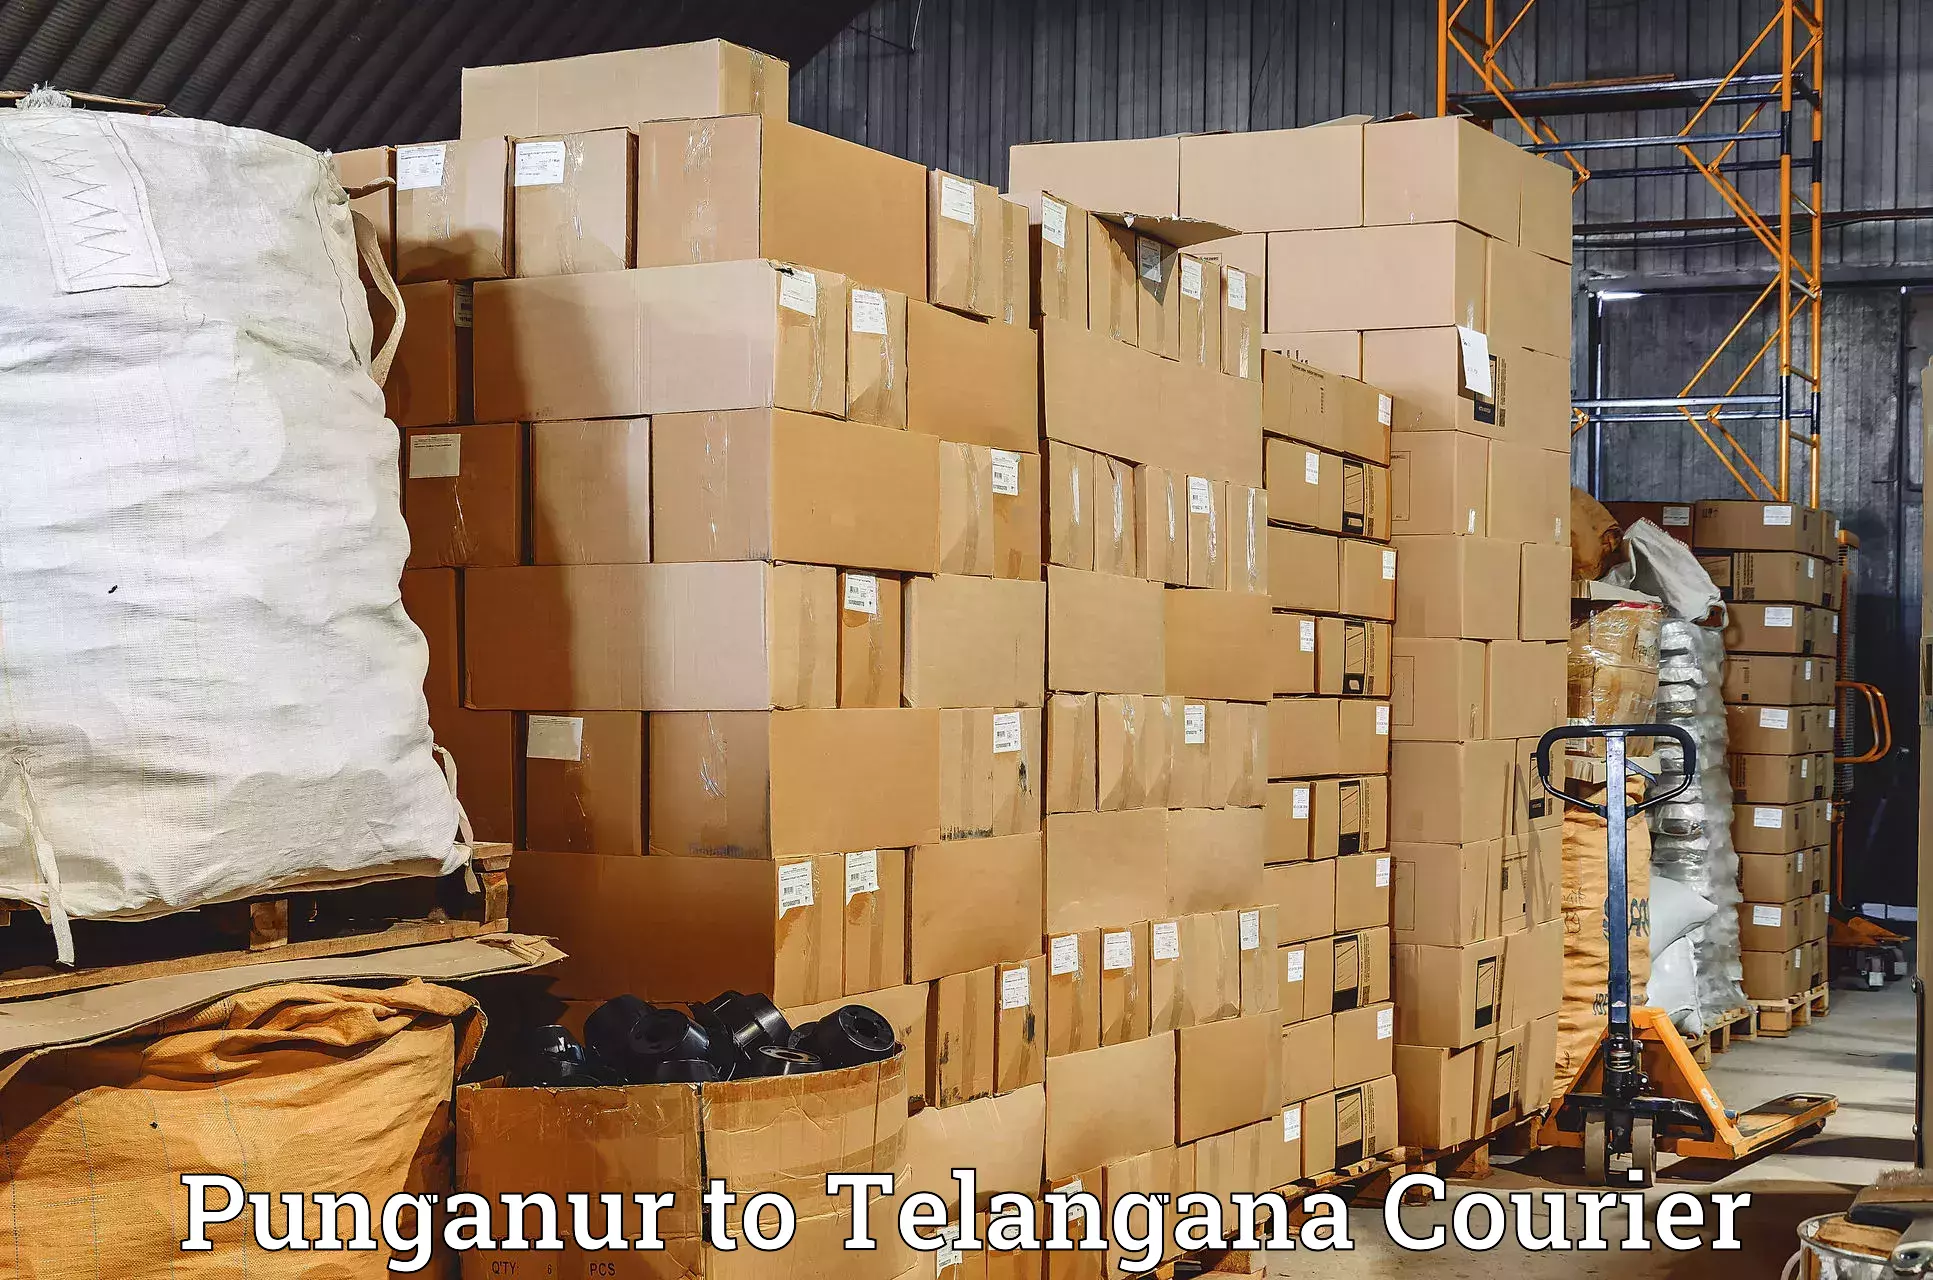 Courier insurance in Punganur to Sathupally